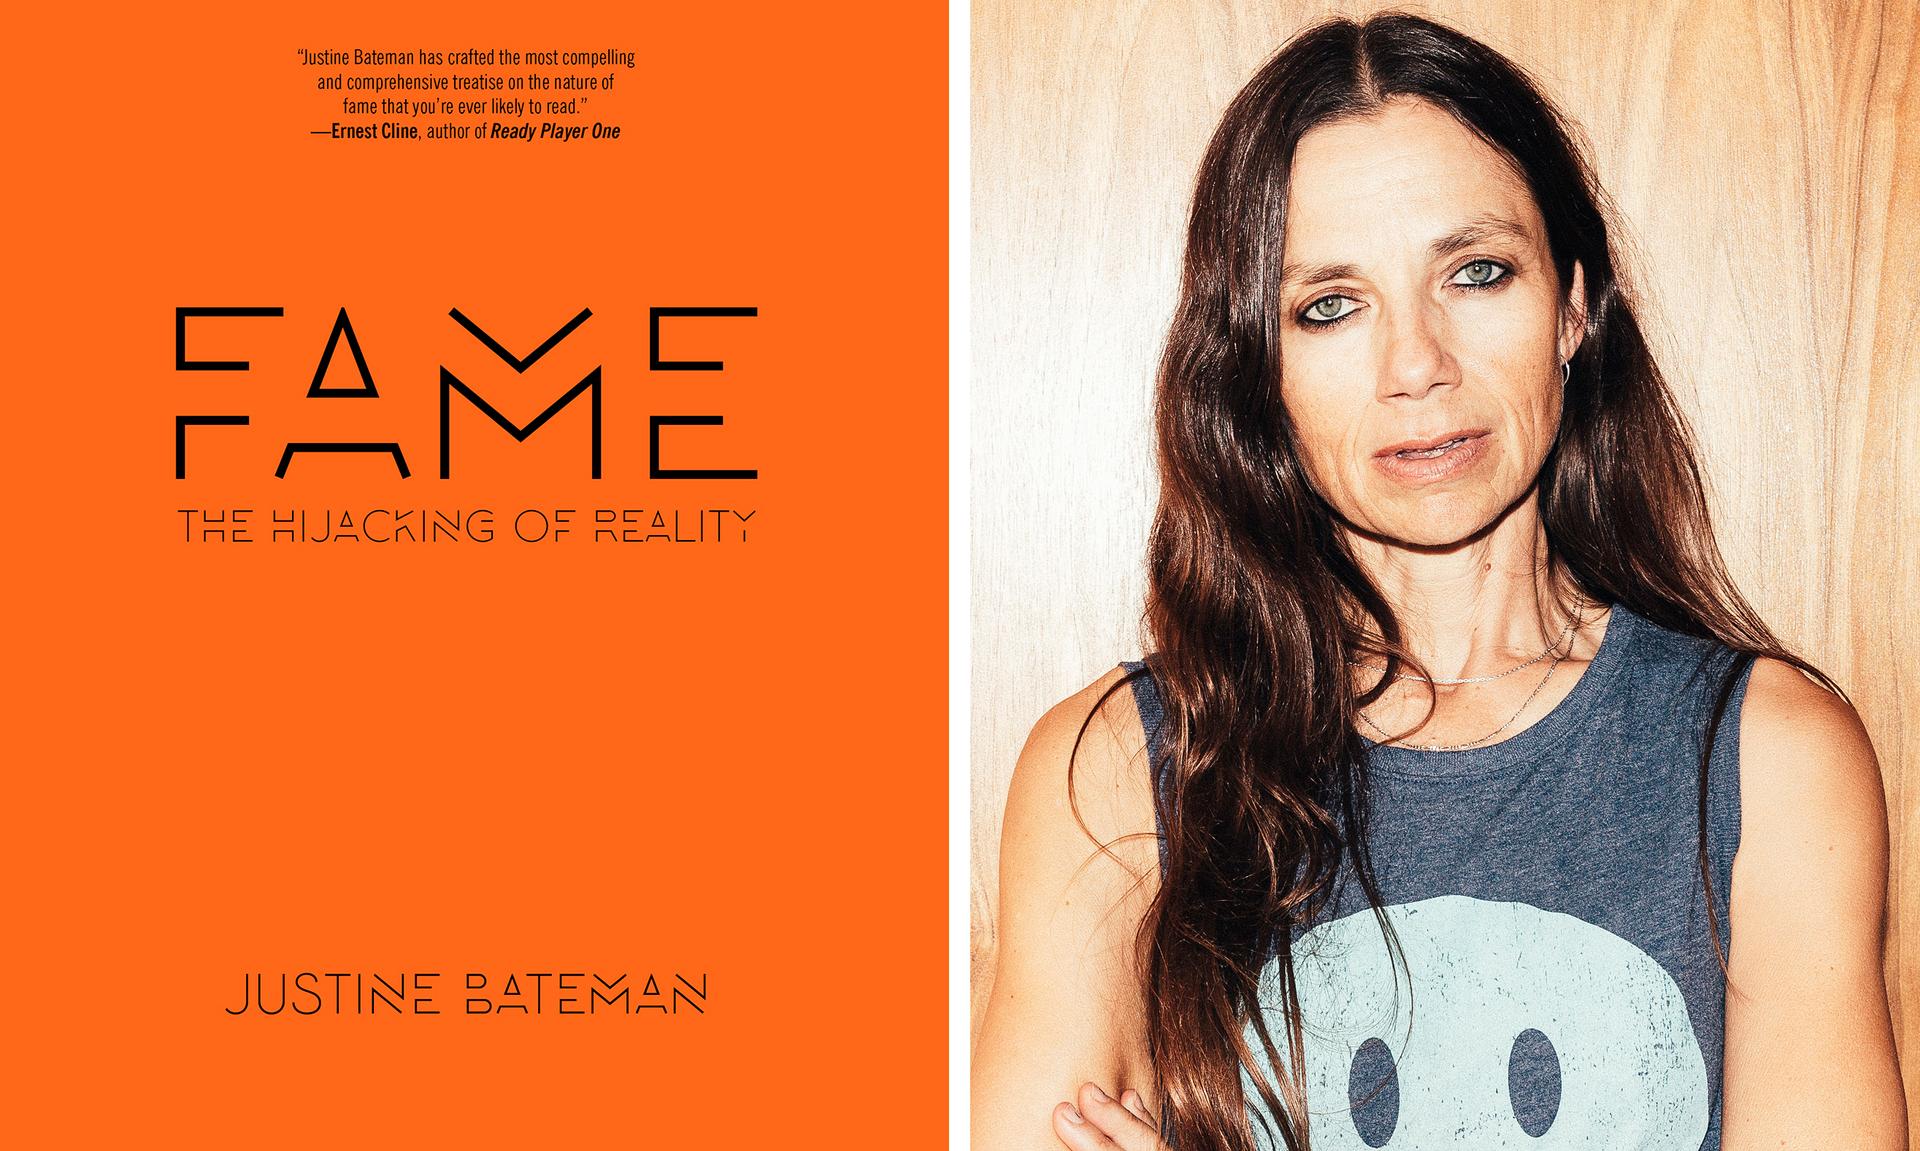 “Fame: The Hijacking of Reality” by Justine Bateman